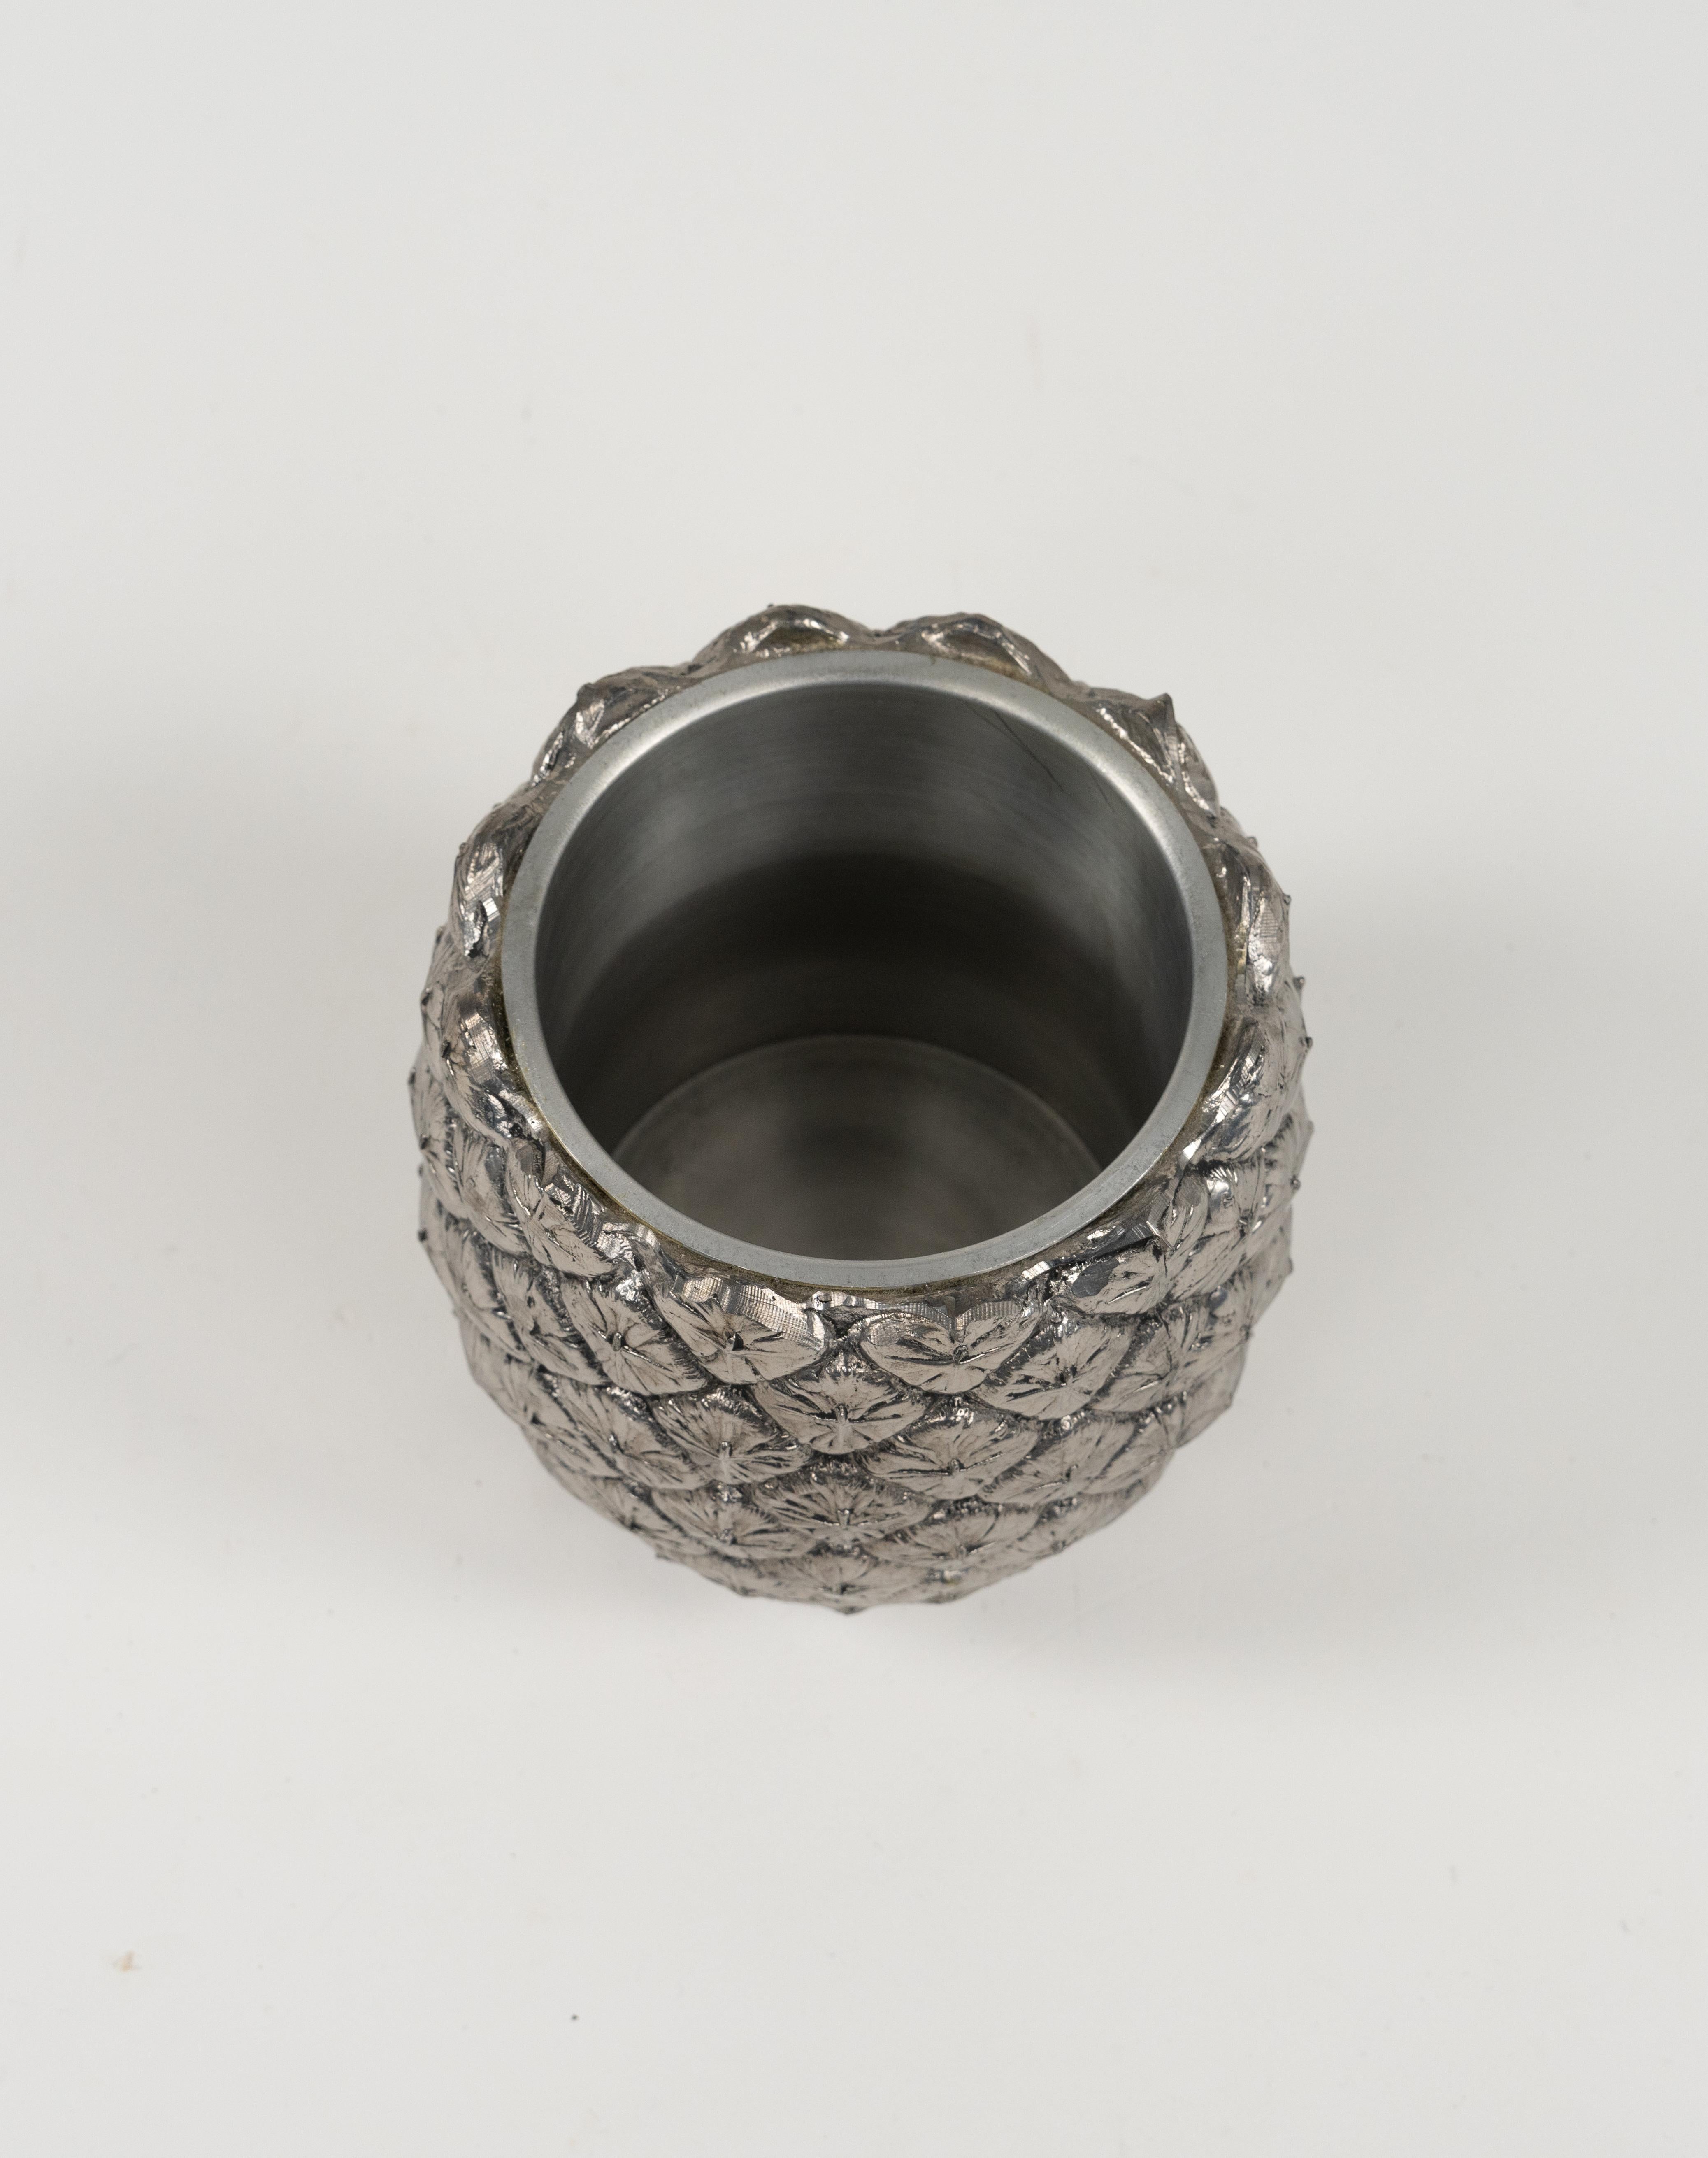 Midcentury Pewter Pineapple Form Ice Bucket by Mauro Manetti Italy, 1960s For Sale 7